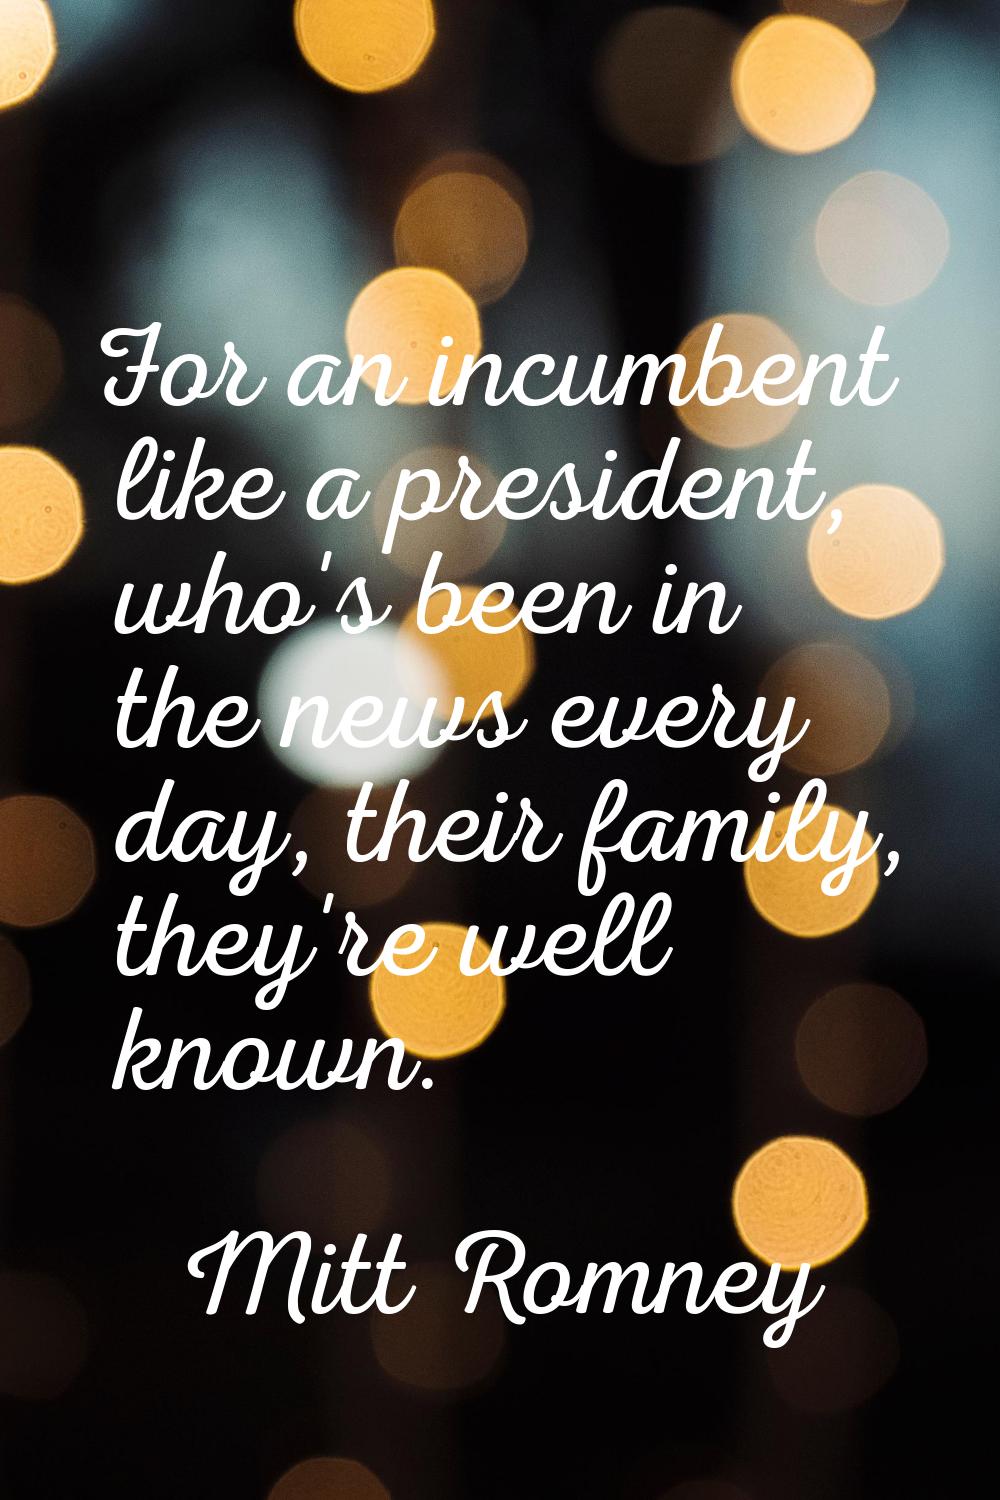 For an incumbent like a president, who's been in the news every day, their family, they're well kno